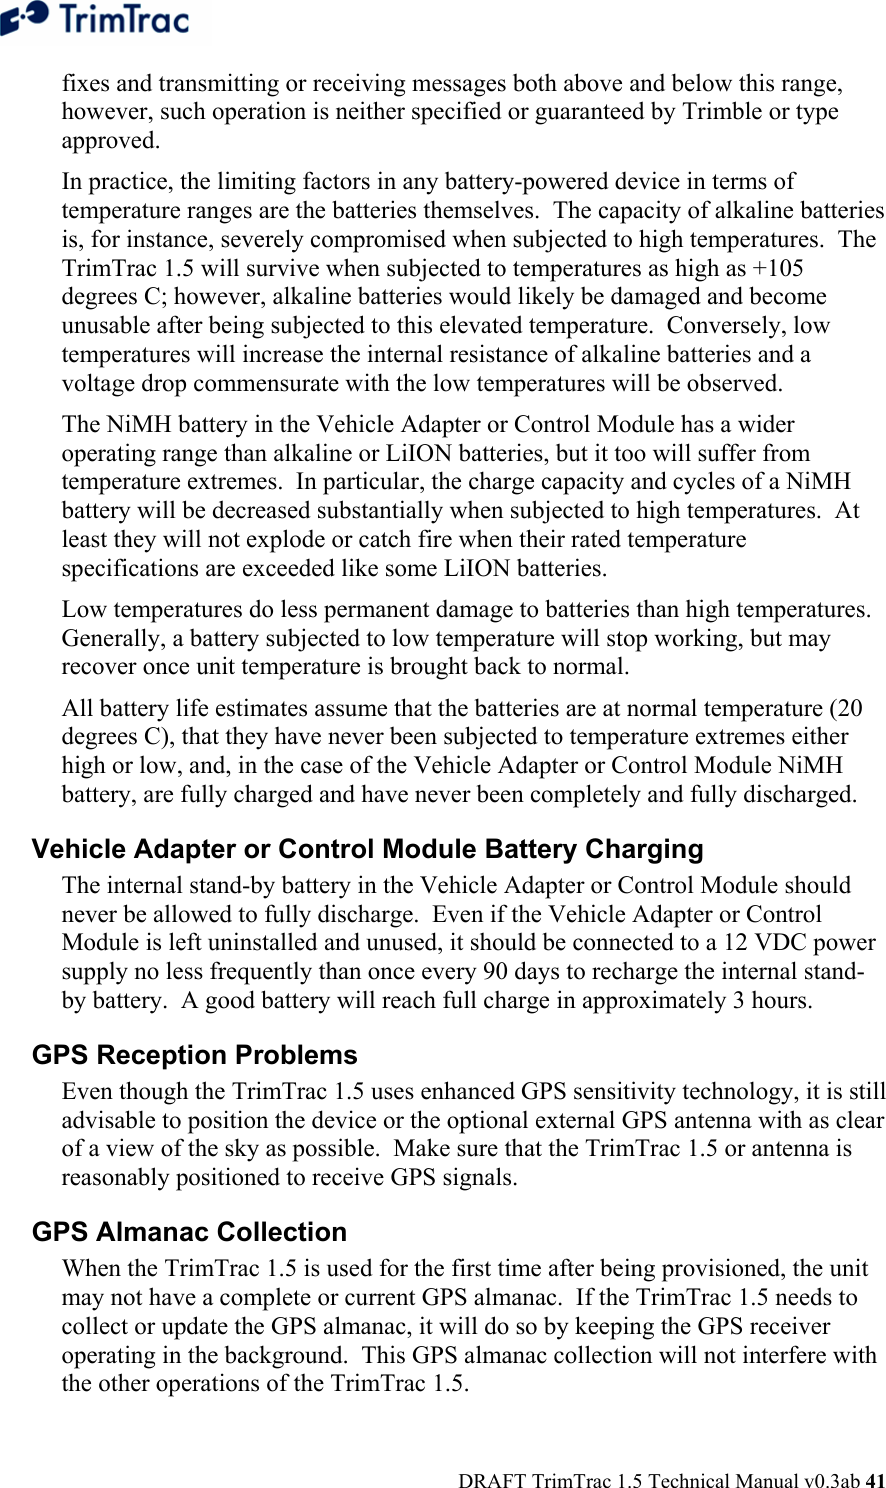  DRAFT TrimTrac 1.5 Technical Manual v0.3ab 41 fixes and transmitting or receiving messages both above and below this range, however, such operation is neither specified or guaranteed by Trimble or type approved. In practice, the limiting factors in any battery-powered device in terms of temperature ranges are the batteries themselves.  The capacity of alkaline batteries is, for instance, severely compromised when subjected to high temperatures.  The TrimTrac 1.5 will survive when subjected to temperatures as high as +105 degrees C; however, alkaline batteries would likely be damaged and become unusable after being subjected to this elevated temperature.  Conversely, low temperatures will increase the internal resistance of alkaline batteries and a voltage drop commensurate with the low temperatures will be observed.   The NiMH battery in the Vehicle Adapter or Control Module has a wider operating range than alkaline or LiION batteries, but it too will suffer from temperature extremes.  In particular, the charge capacity and cycles of a NiMH battery will be decreased substantially when subjected to high temperatures.  At least they will not explode or catch fire when their rated temperature specifications are exceeded like some LiION batteries. Low temperatures do less permanent damage to batteries than high temperatures.  Generally, a battery subjected to low temperature will stop working, but may recover once unit temperature is brought back to normal. All battery life estimates assume that the batteries are at normal temperature (20 degrees C), that they have never been subjected to temperature extremes either high or low, and, in the case of the Vehicle Adapter or Control Module NiMH battery, are fully charged and have never been completely and fully discharged. Vehicle Adapter or Control Module Battery Charging  The internal stand-by battery in the Vehicle Adapter or Control Module should never be allowed to fully discharge.  Even if the Vehicle Adapter or Control Module is left uninstalled and unused, it should be connected to a 12 VDC power supply no less frequently than once every 90 days to recharge the internal stand-by battery.  A good battery will reach full charge in approximately 3 hours. GPS Reception Problems  Even though the TrimTrac 1.5 uses enhanced GPS sensitivity technology, it is still advisable to position the device or the optional external GPS antenna with as clear of a view of the sky as possible.  Make sure that the TrimTrac 1.5 or antenna is reasonably positioned to receive GPS signals. GPS Almanac Collection When the TrimTrac 1.5 is used for the first time after being provisioned, the unit may not have a complete or current GPS almanac.  If the TrimTrac 1.5 needs to collect or update the GPS almanac, it will do so by keeping the GPS receiver operating in the background.  This GPS almanac collection will not interfere with the other operations of the TrimTrac 1.5.  